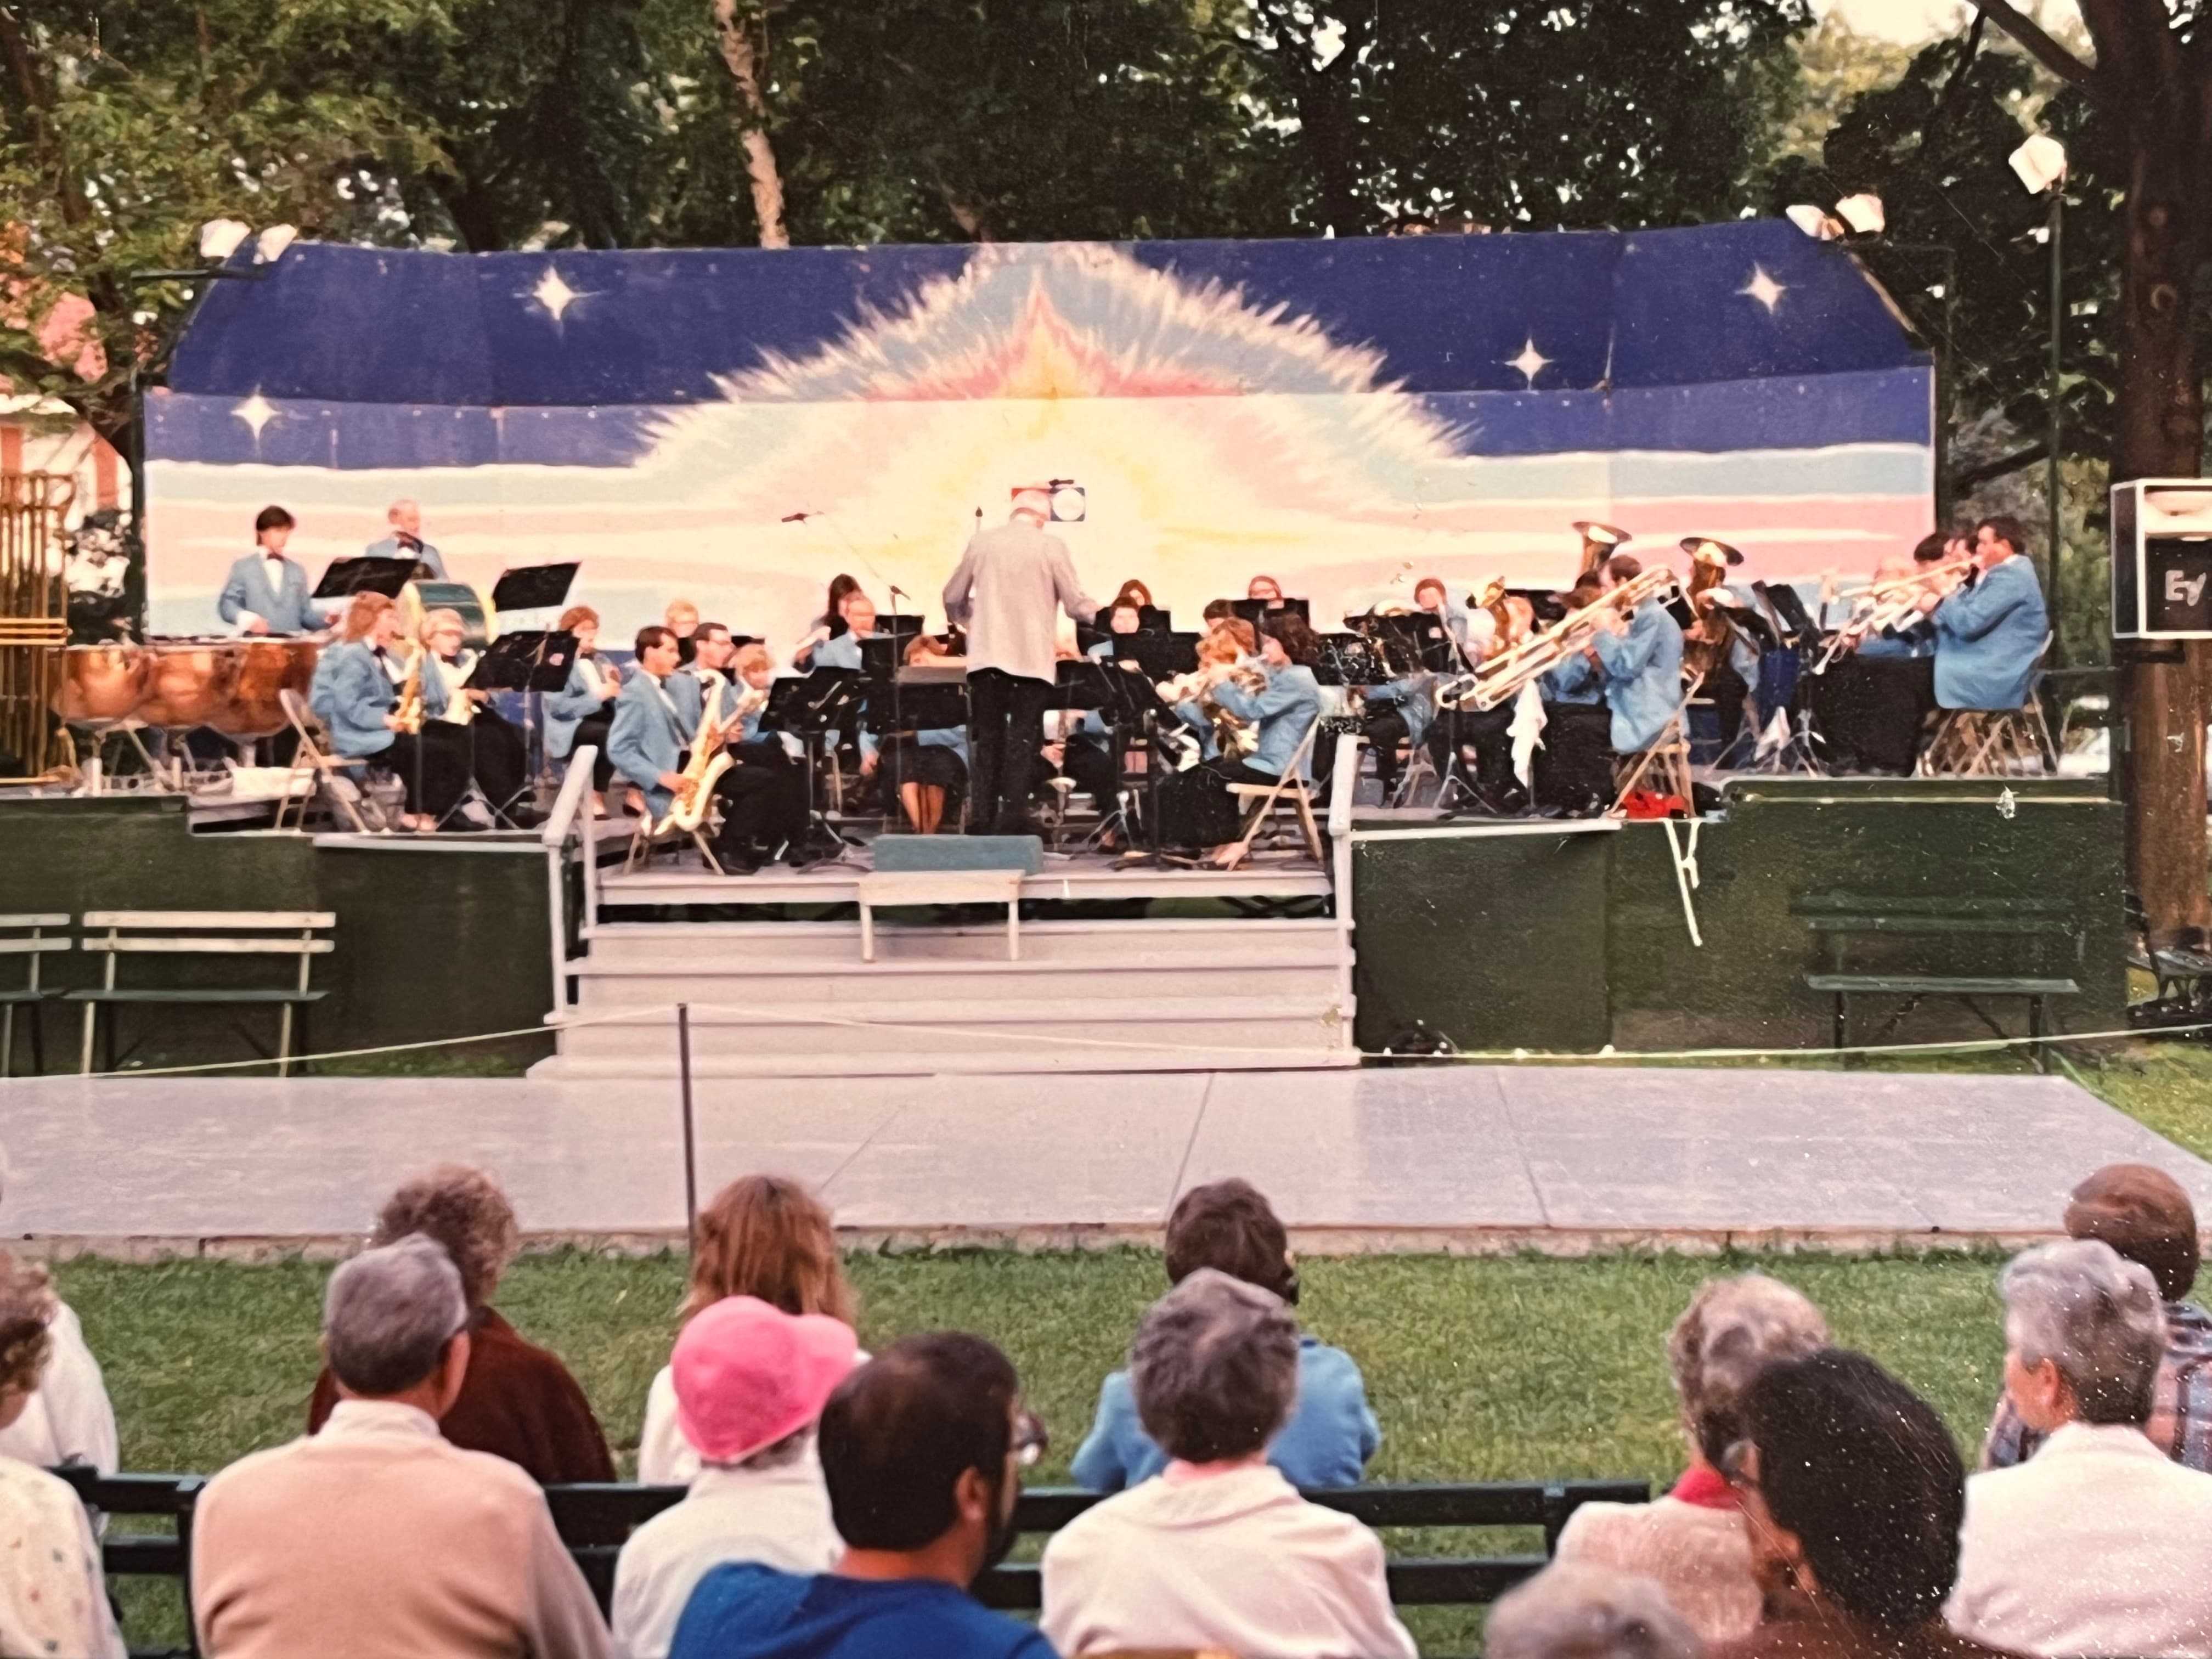 Clare Hounsell conducting the band on an old multi-colored band shell. The band is wearing light-blue suit jackets.